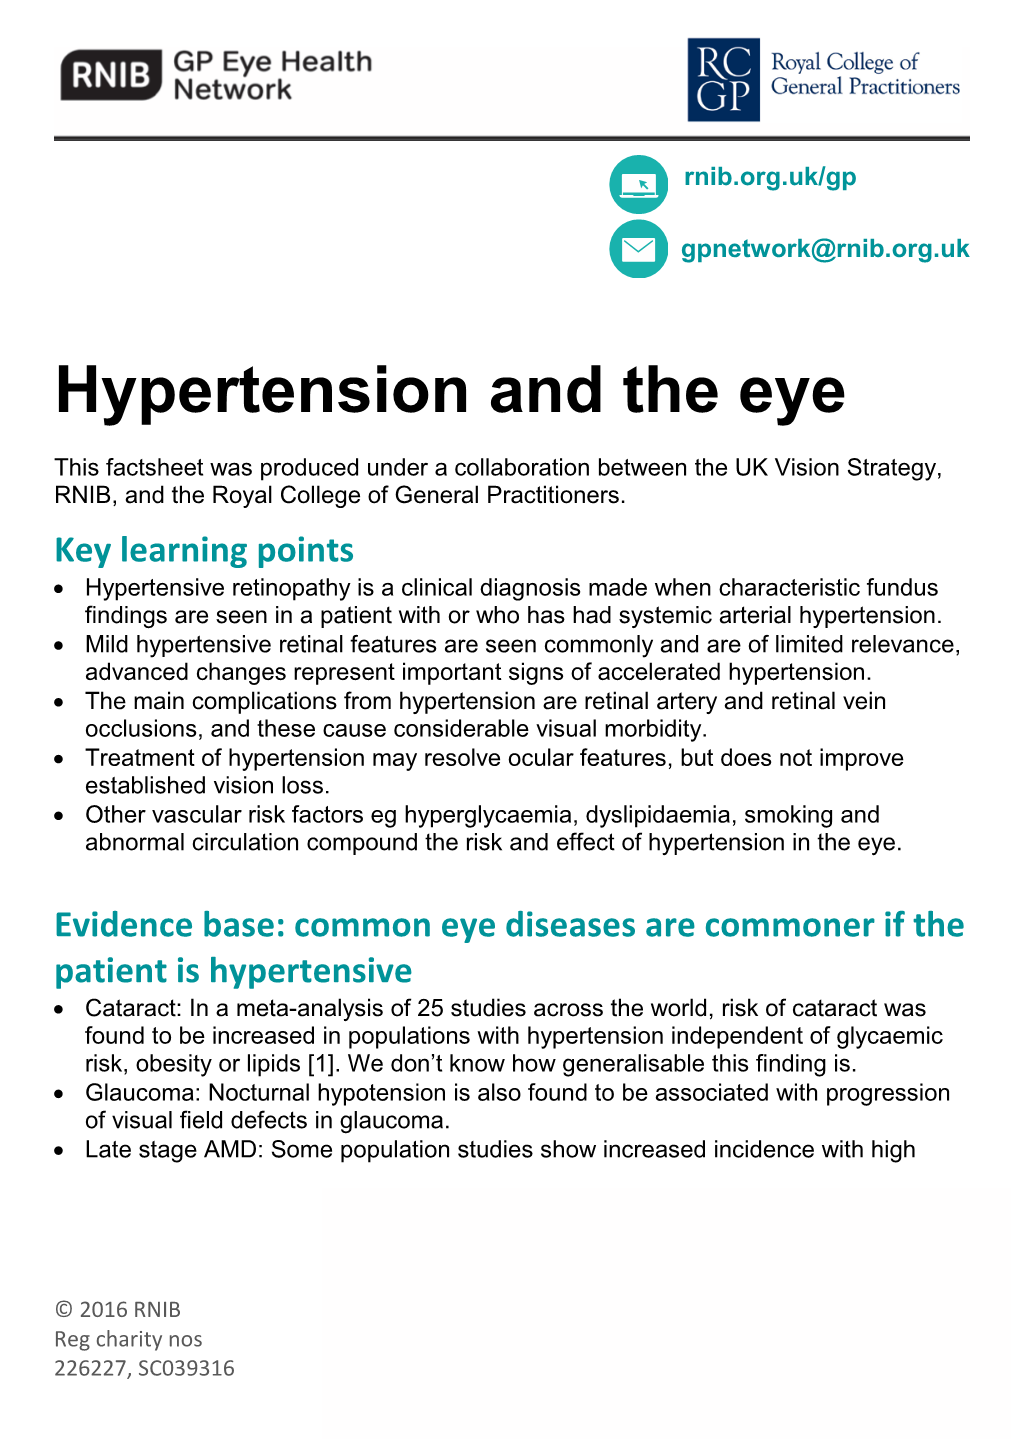 Hypertension and the Eye